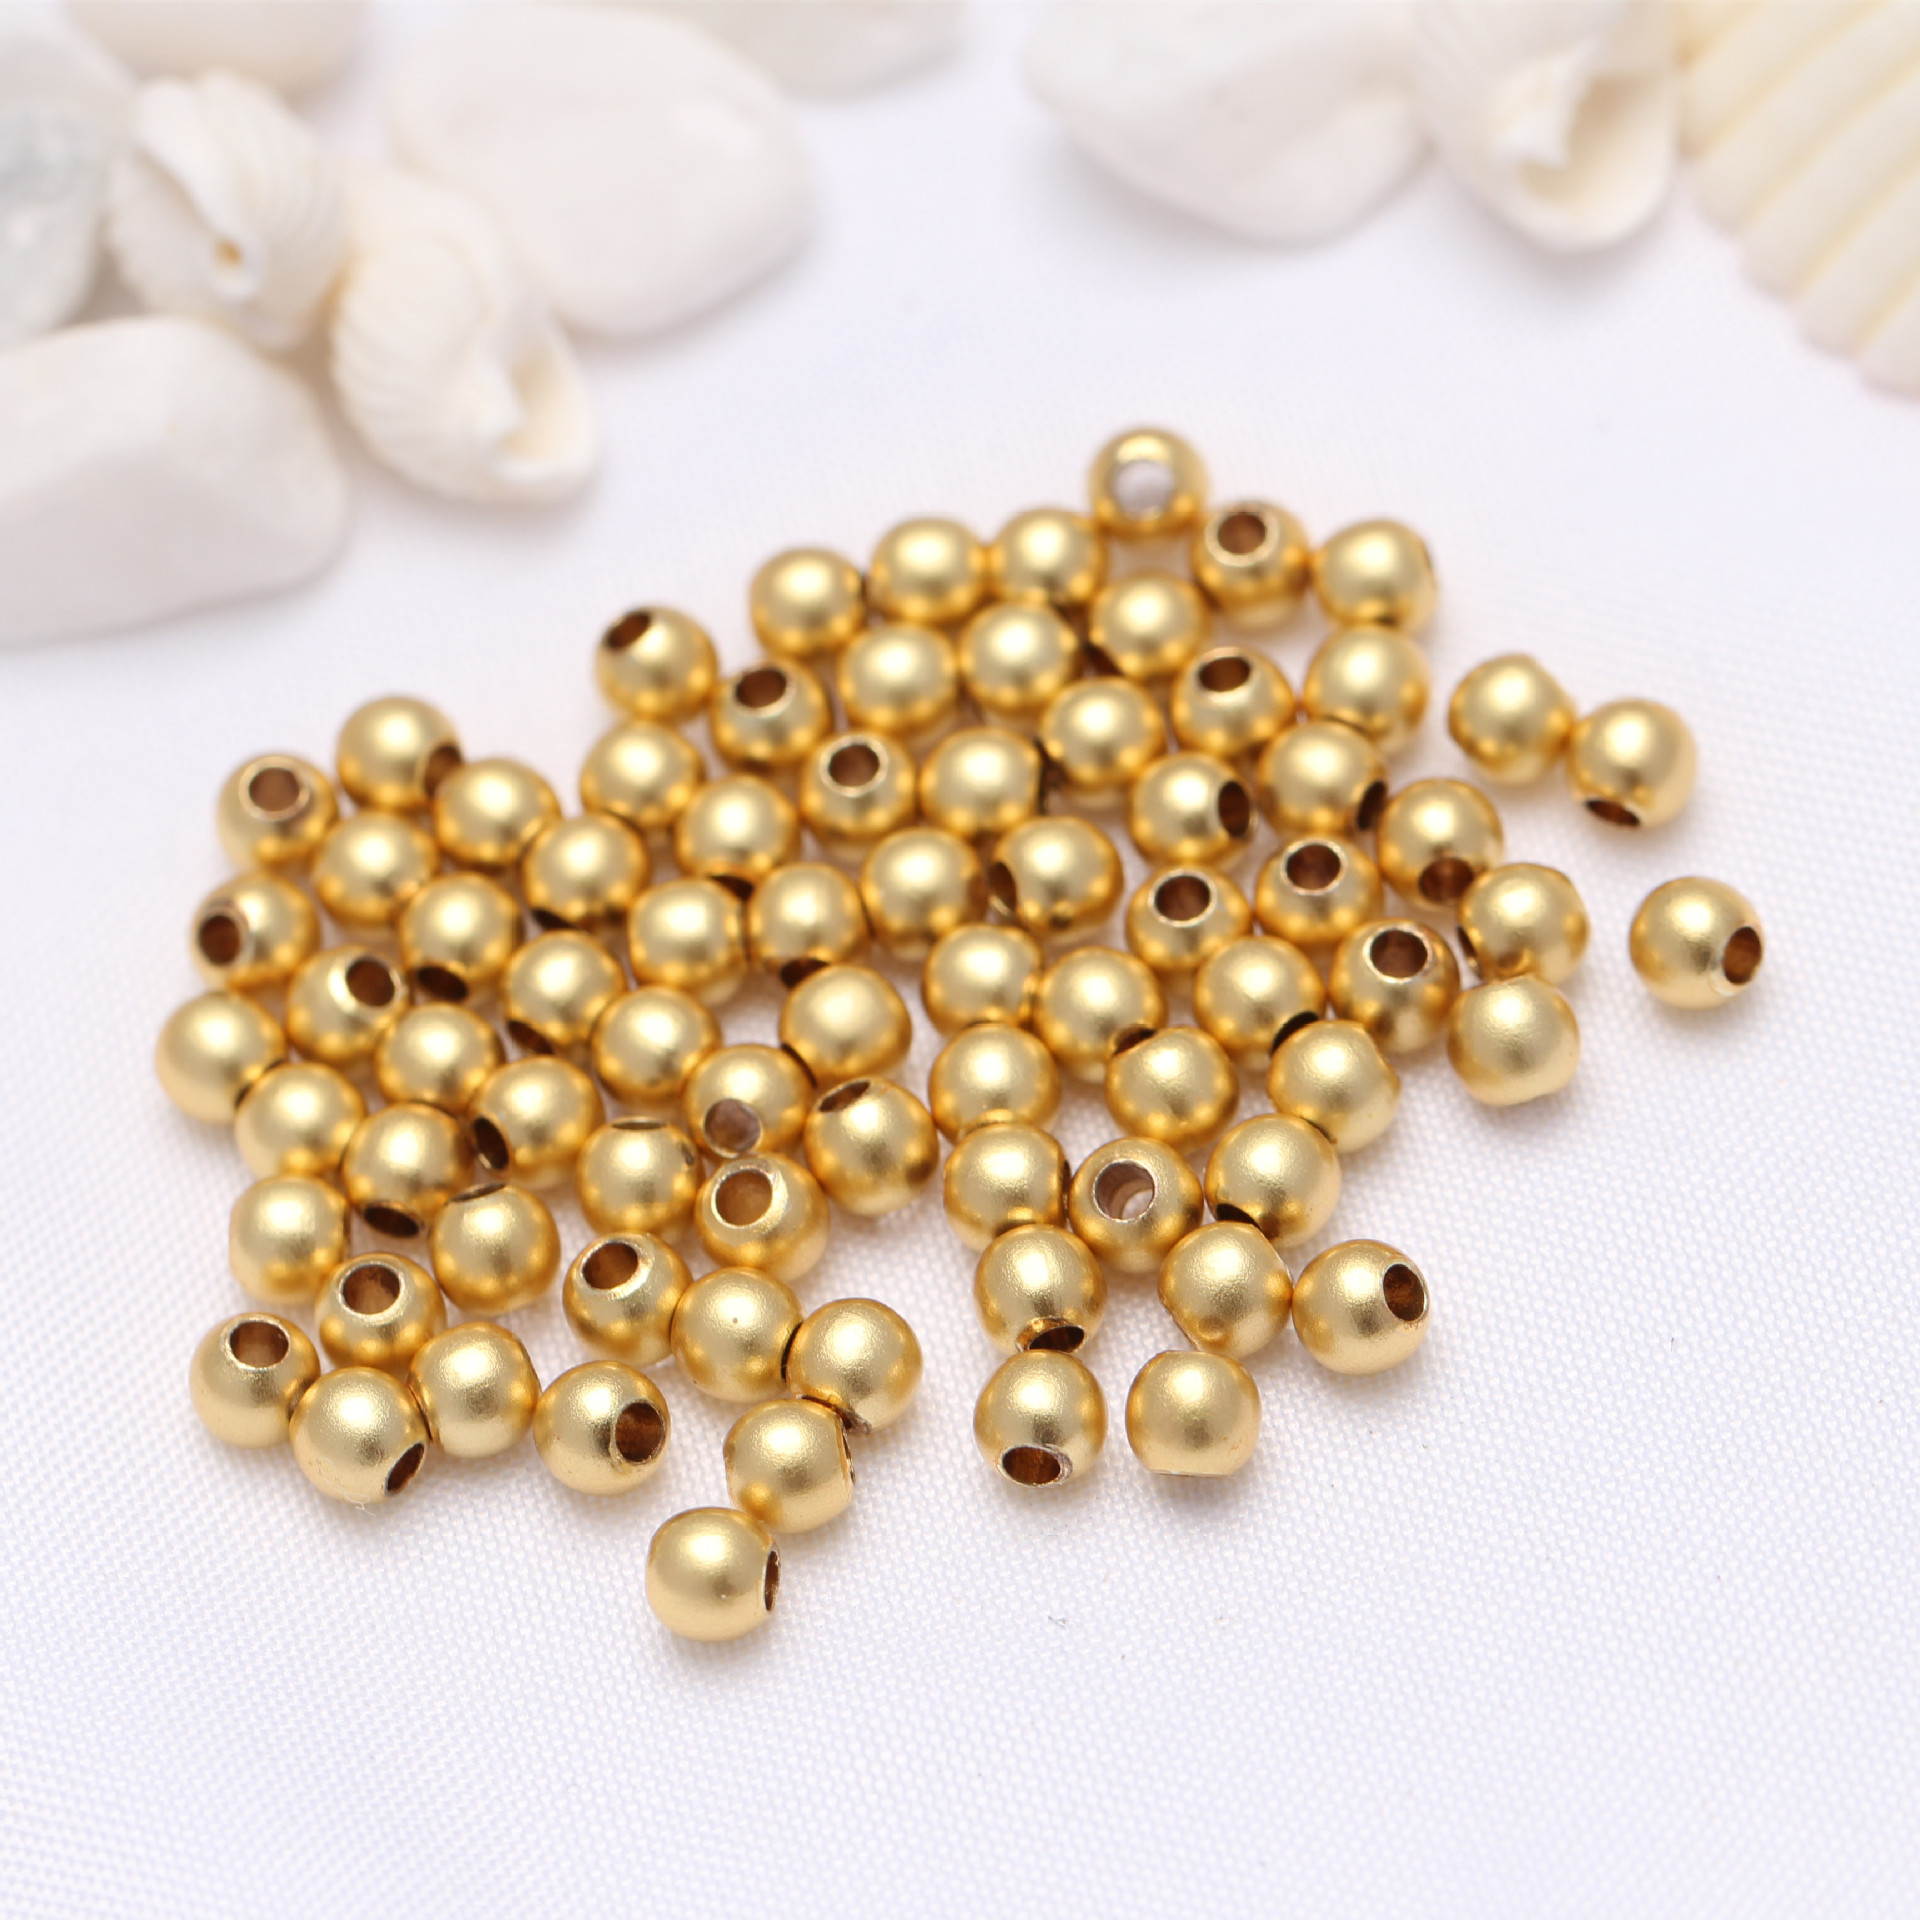 A-82 Color Preserving Sand Gold Loose Bead 5.0mm